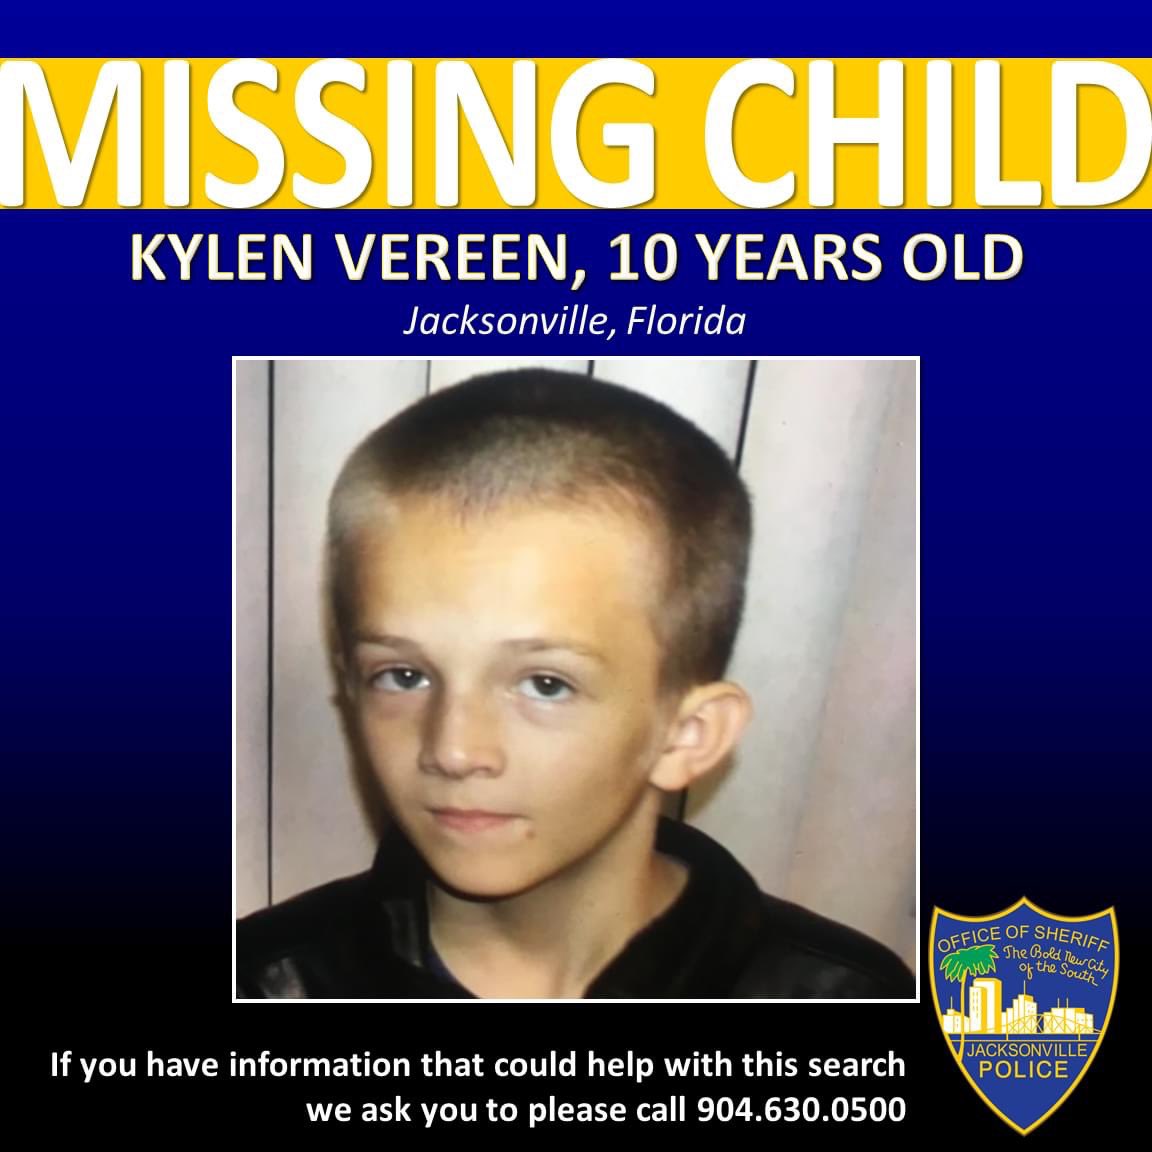 PLEASE RT - MISSING CHILD 10 year old Kylen Vereen is missing from #Jacksonville. He was last seen around 12:30pm in the area of 10500 Conrad Drive. Call #JSO at 904-630-0500 with information regarding his location.